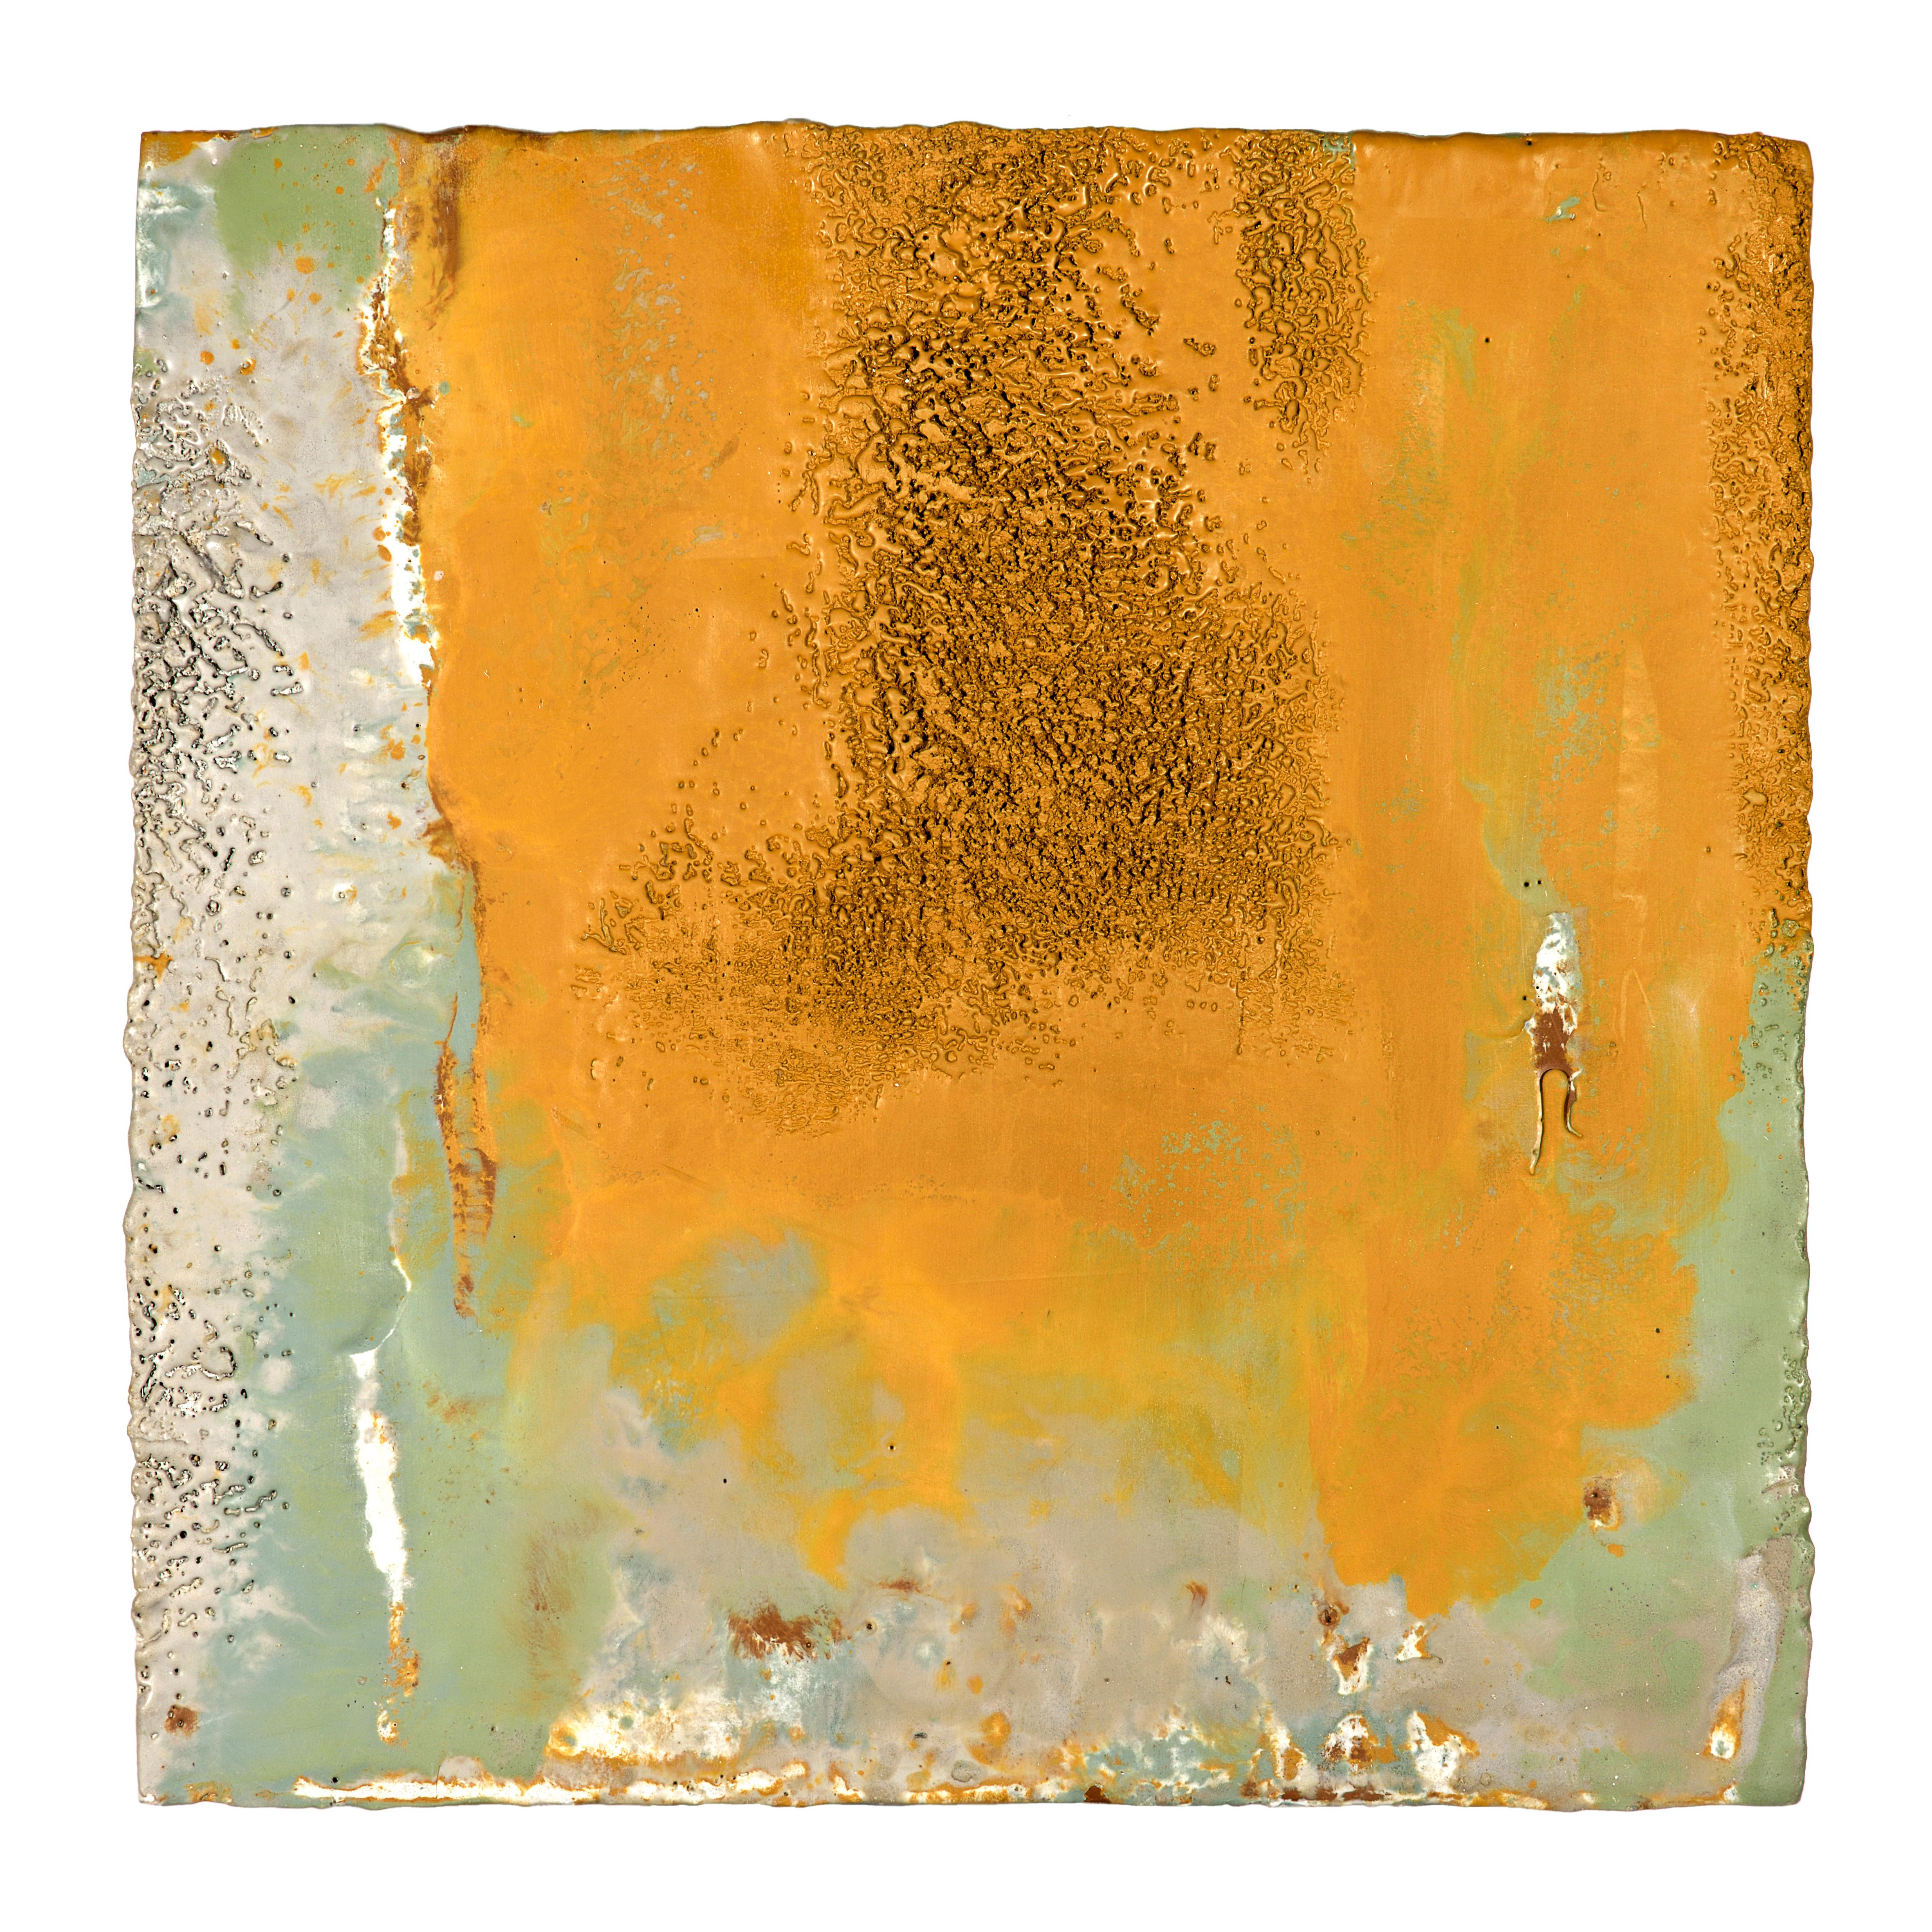 Contemporary Richard Hirsch Encaustic Painting of Nothing #28, 2012 For Sale